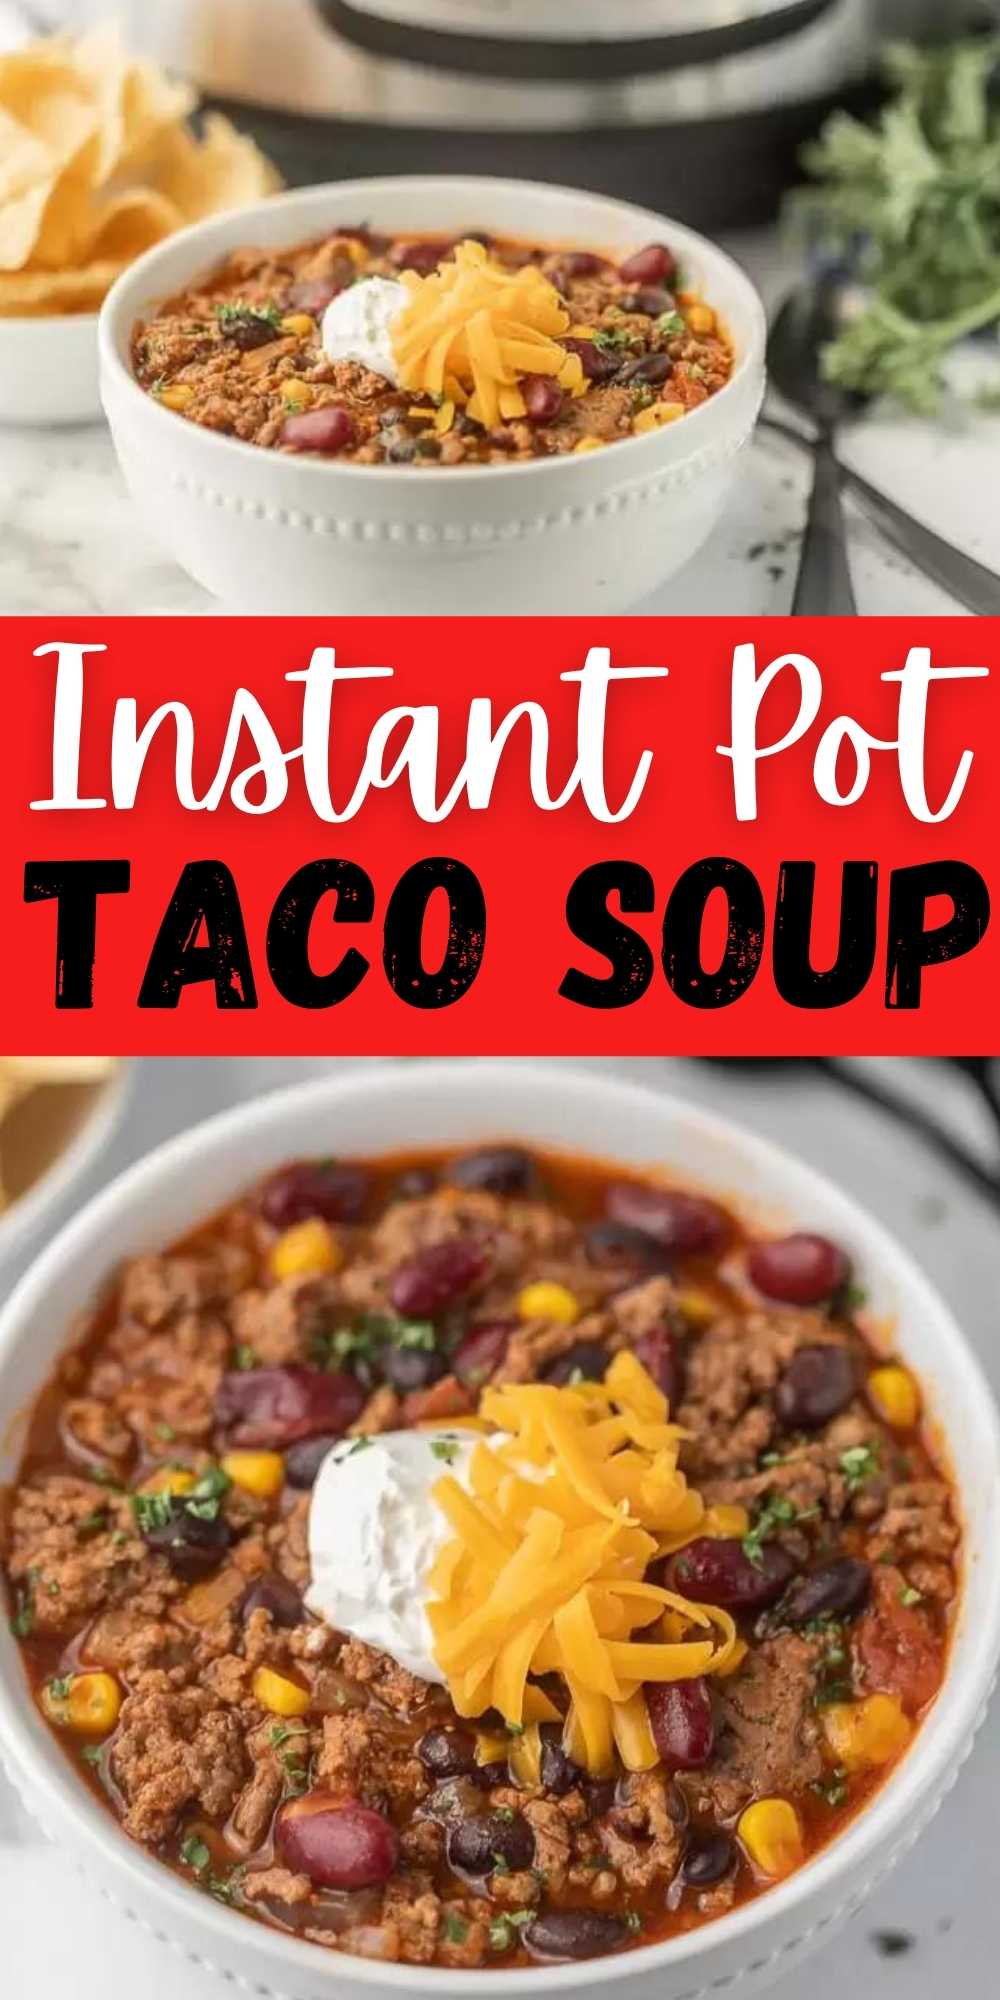 Instant Pot Taco Soup Recipe with Beef can be ready in only 15 minutes. Taco soup pressure cooker recipe gets dinner on the table fast. Try this easy Instant Pot Taco Soup with Ground Beef.  You will love this easy and delicious soup recipe.  #eatingonadime #souprecipes #instantpotrecipes #pressurecookerrecipes #beefrecipes 
